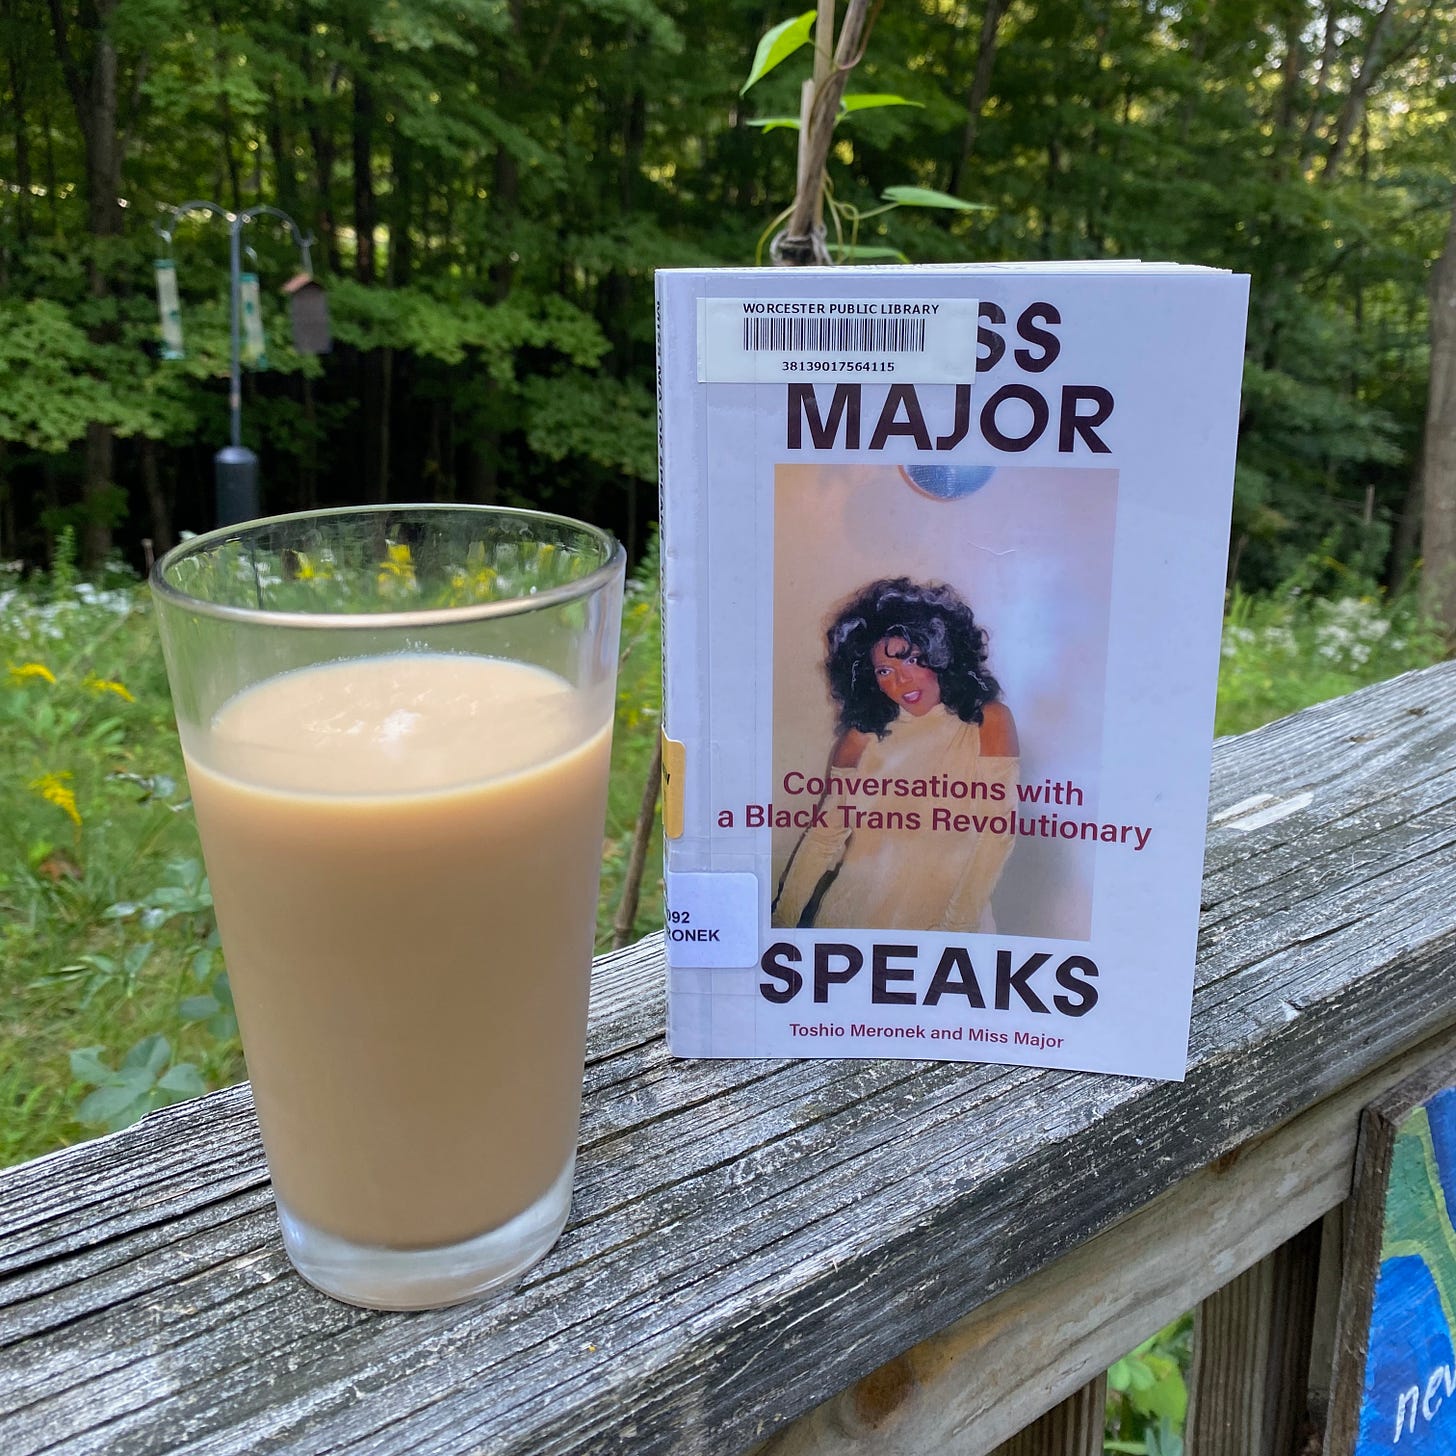 Miss Major speaks standing upright on a porch railing next to a glass of iced tea.